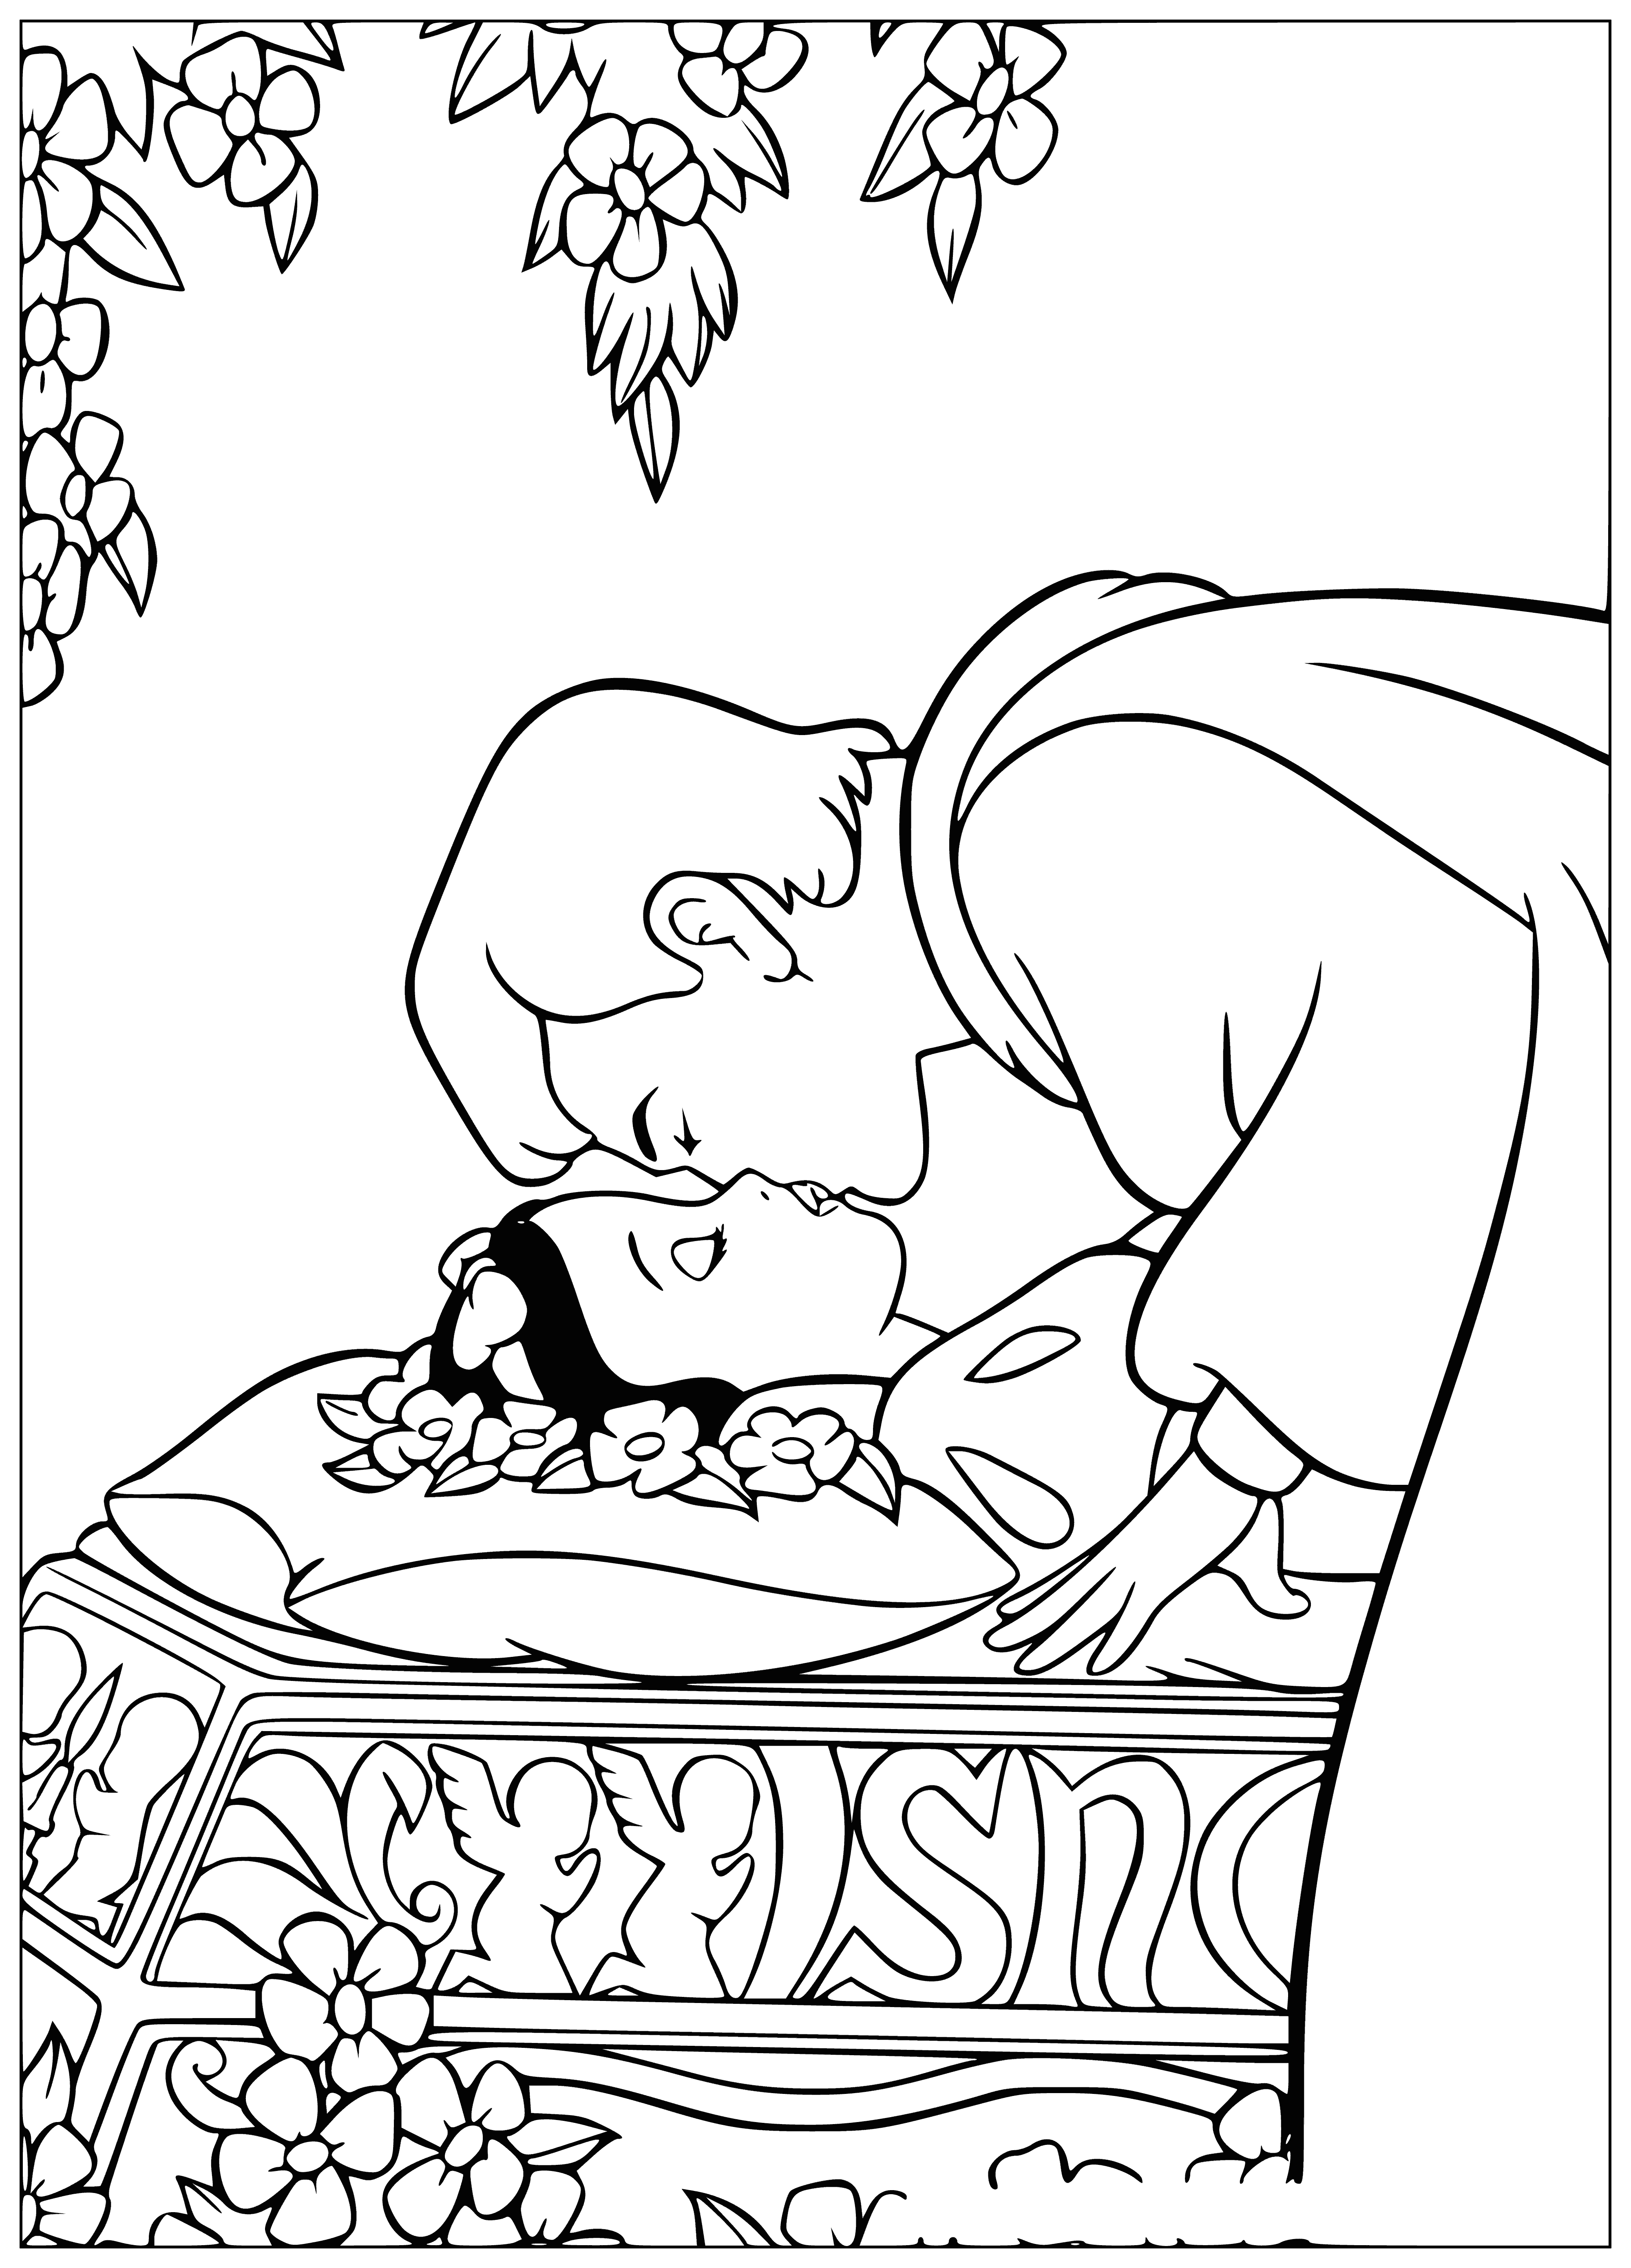 coloring page: Woman in white dress kisses man on horseback by castle. He has rose in one hand, other on her waist.